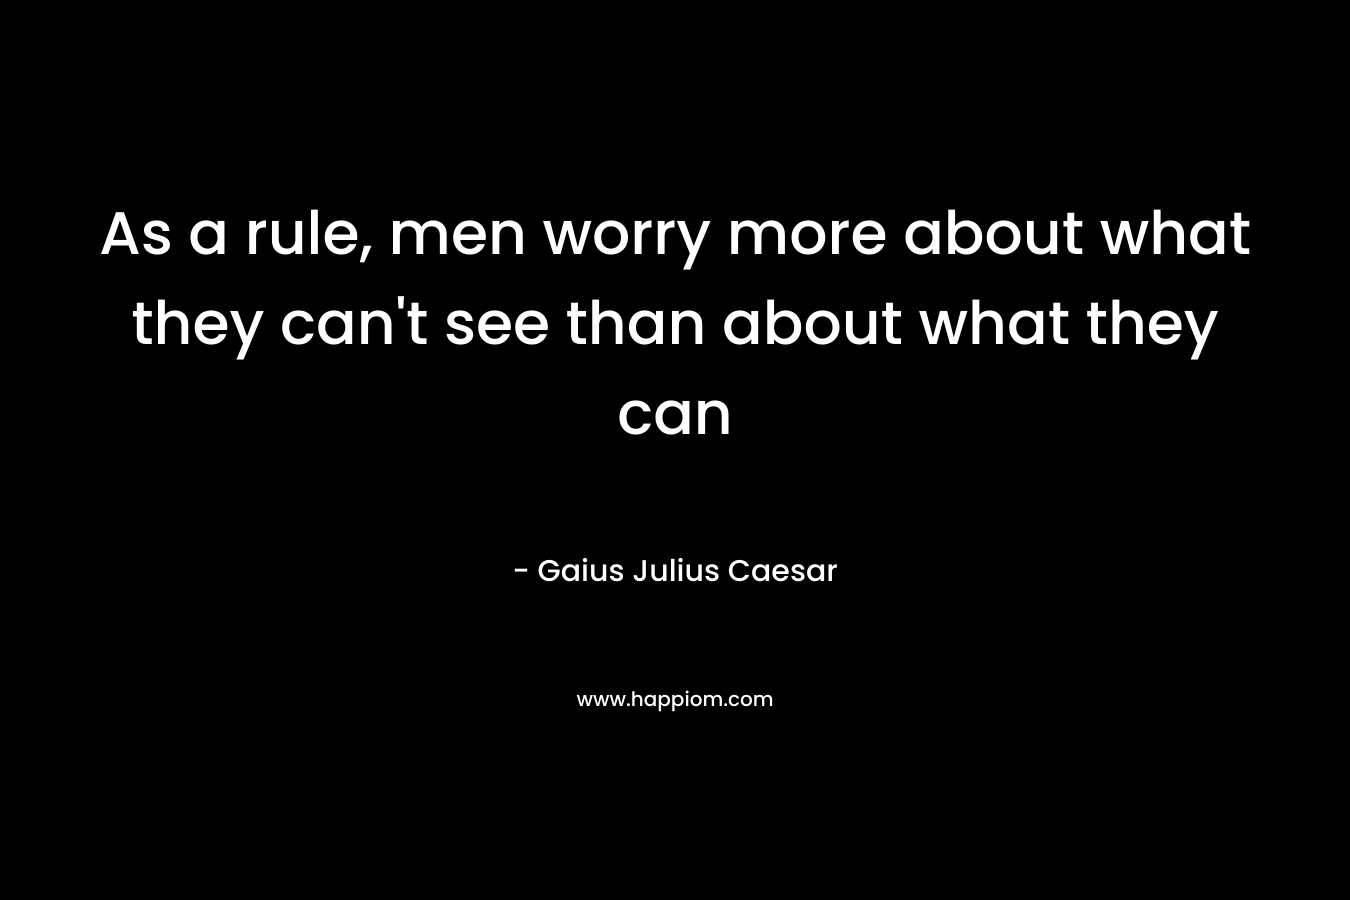 As a rule, men worry more about what they can't see than about what they can